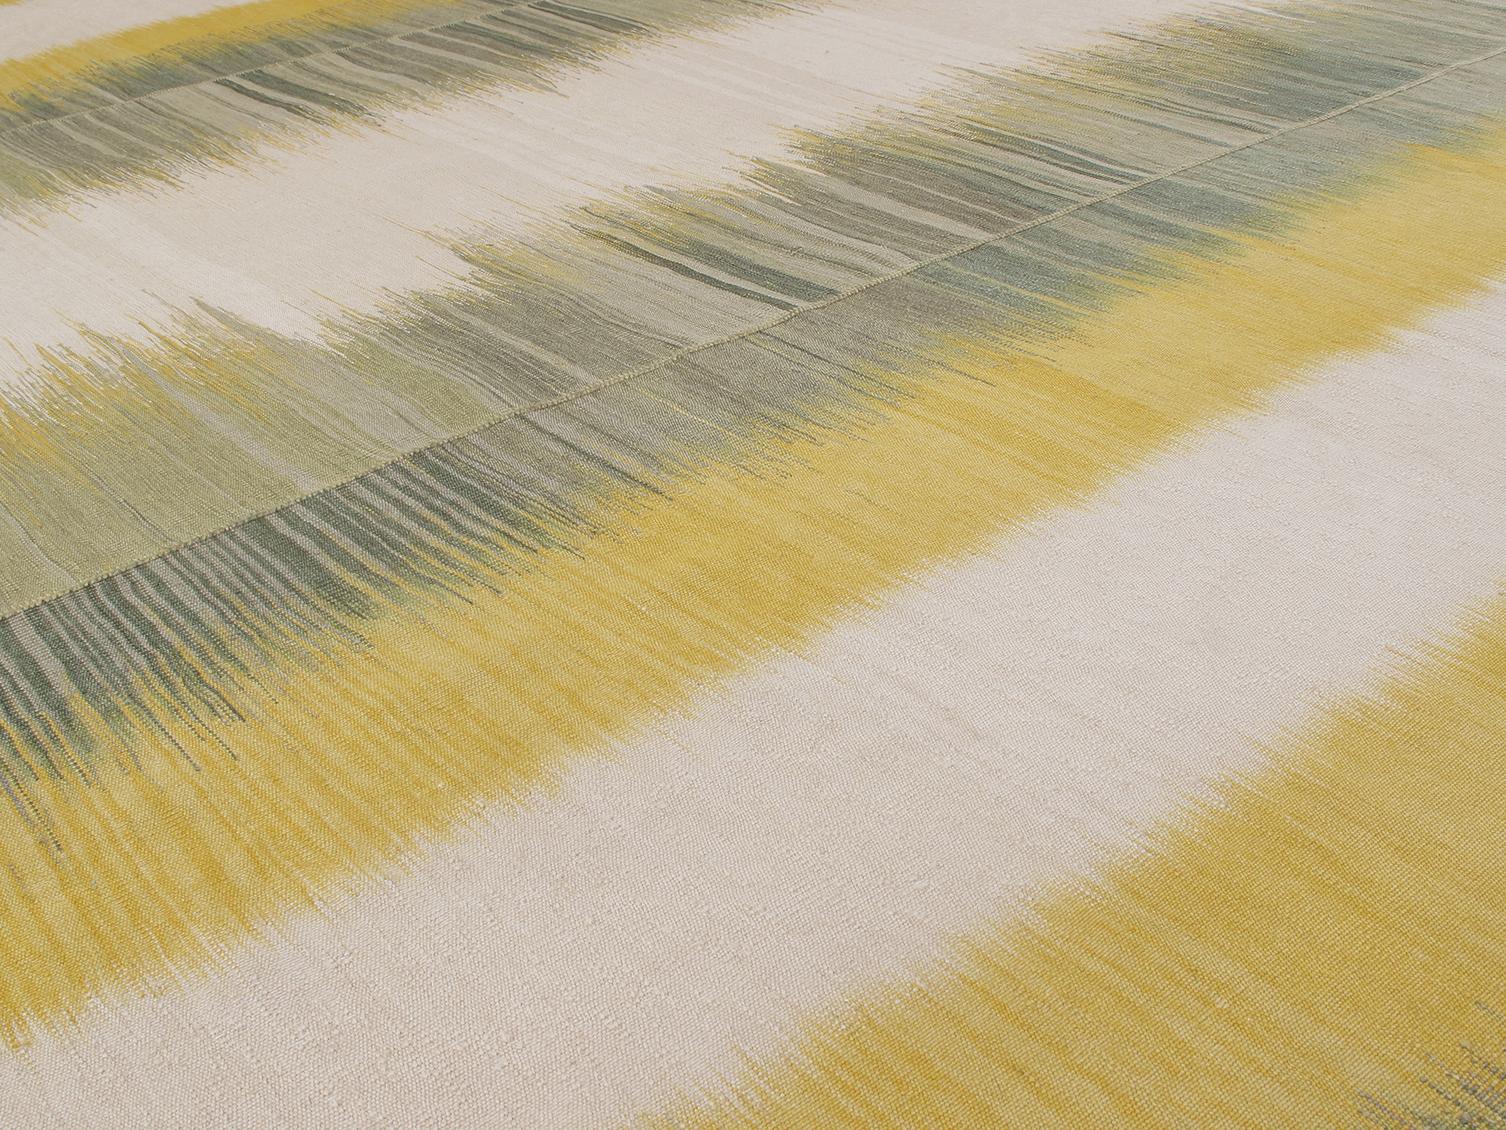 Made in Iran with the finest hand-spun wool, our Mazandaran collection highlights the Minimalist sophistication that existed long before the modern era. The collection was inspired by the kilims that were woven by Persian women in the Mazandaran